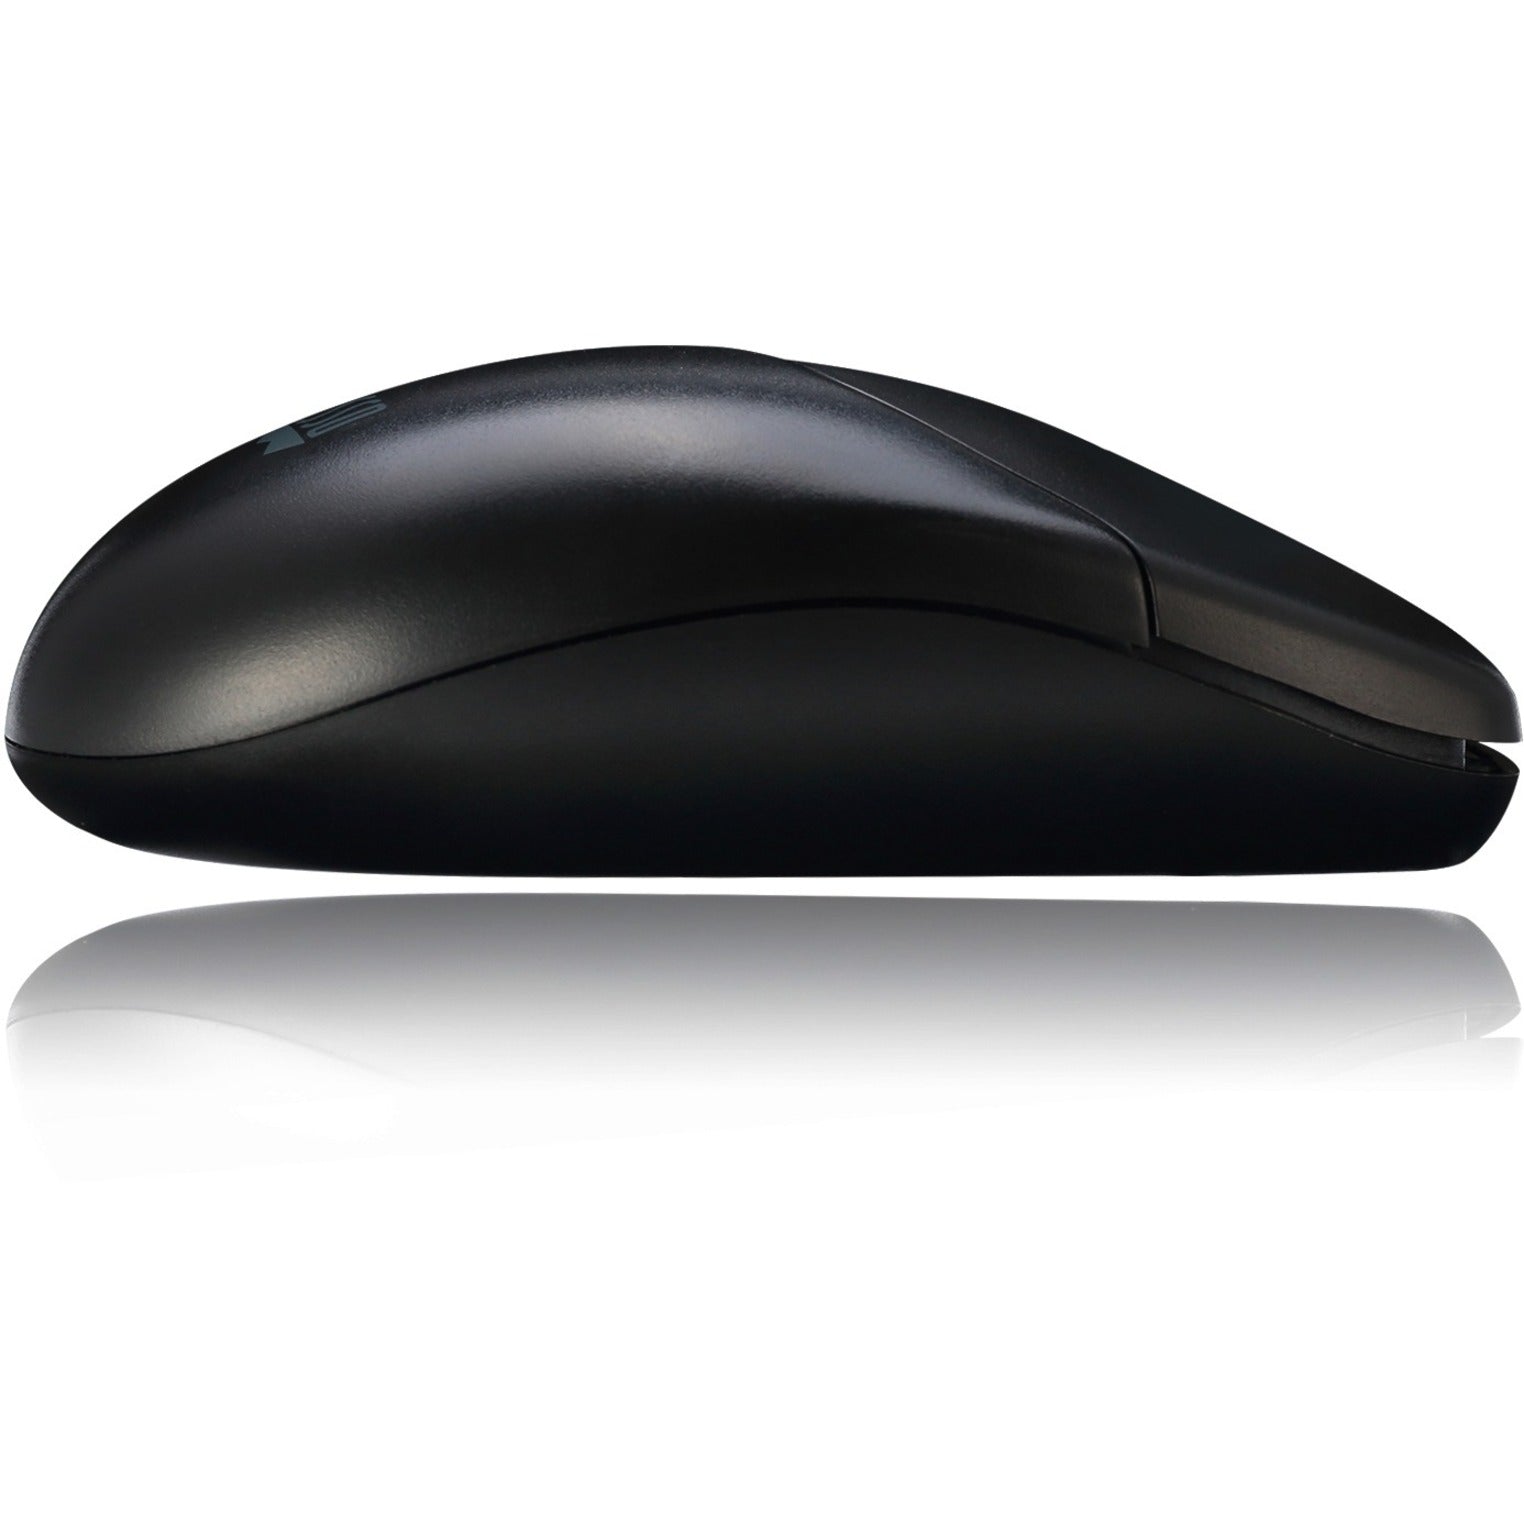 Adesso IMOUSE M60 Antimicrobial Wireless Desktop Mouse, 2.4 GHz Radio Frequency, 1200 dpi Optical, USB